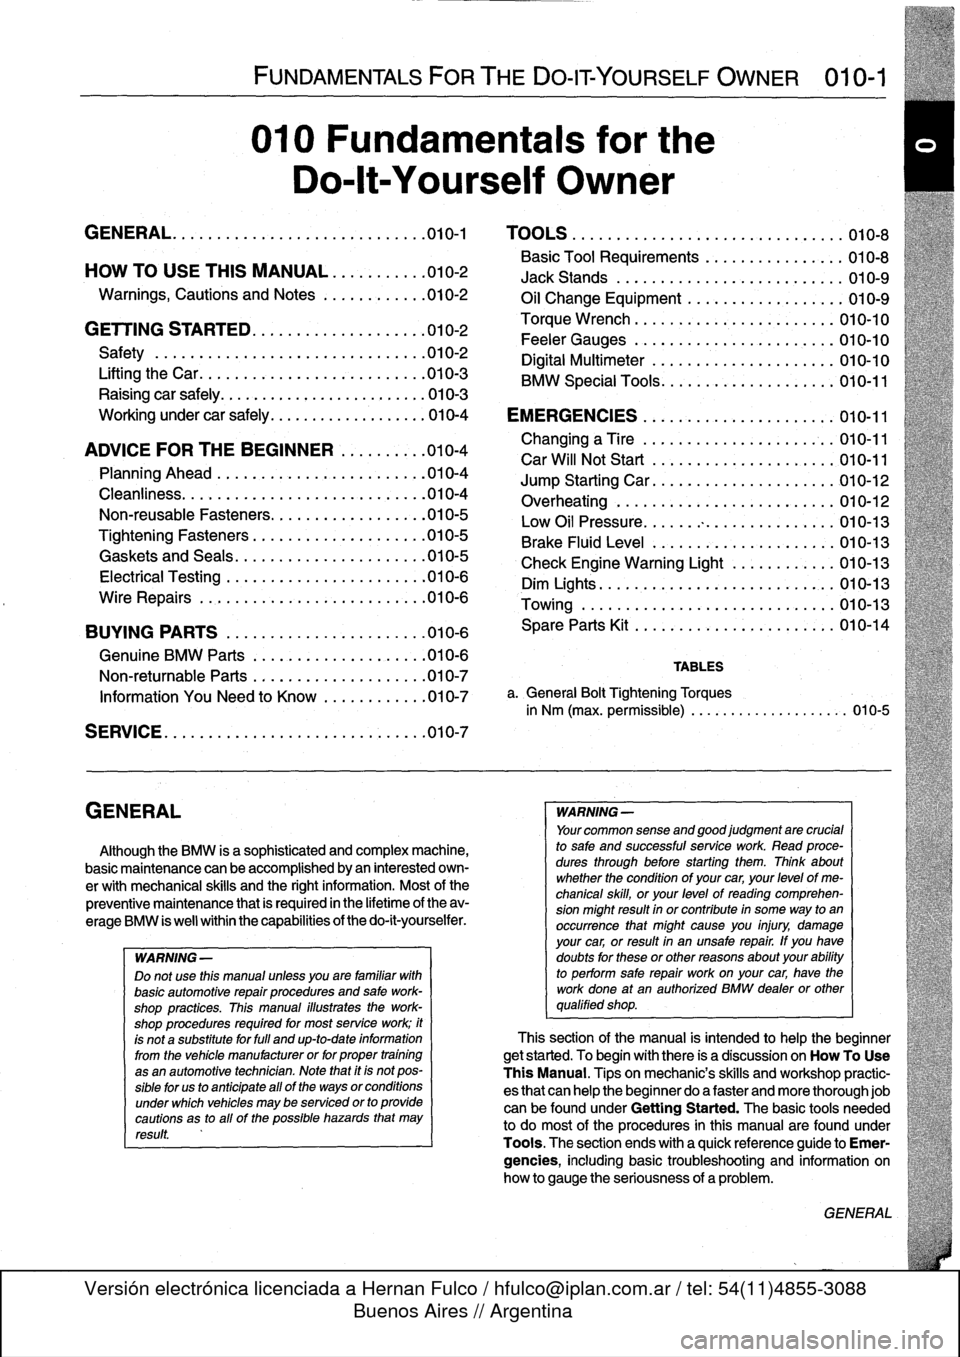 BMW 323i 1996 E36 Workshop Manual 
GENERAL

FUNDAMENTALS
FORTHE
DO-IT
YOURSELF
OWNER

	

010-1

010
Fundamentals
for
the

Do-lt-Yourself
Owner

GENERAL
.......
.
.
.
......
.
.........
.
.
.010-1

	

TOOLS
.
.
...
.
............
.
...